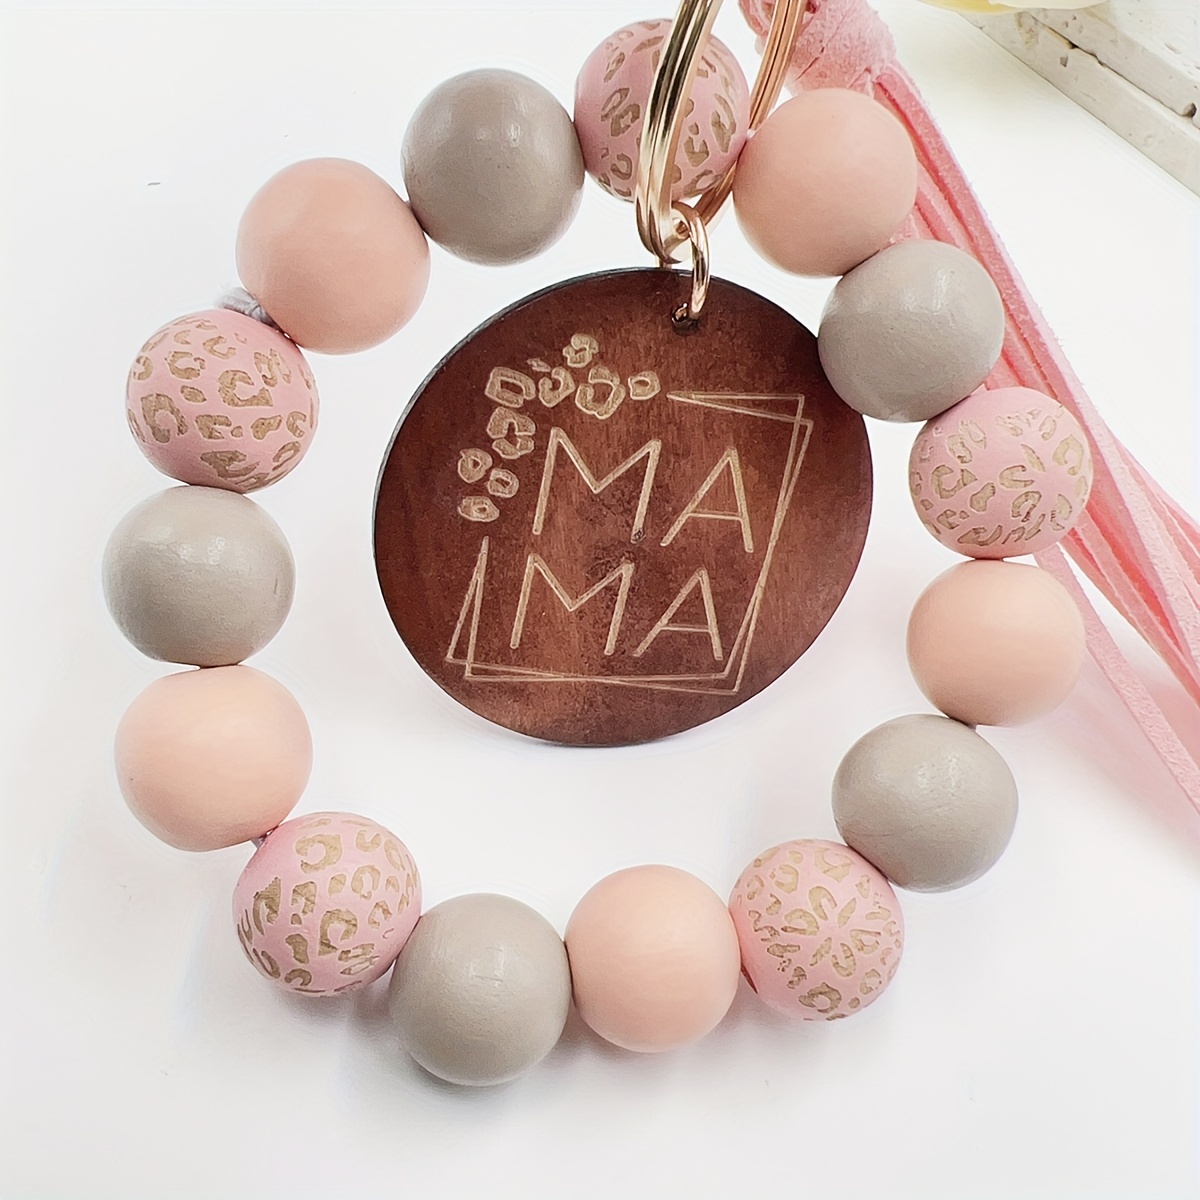 one leopard wooden beads hand beaded speckled wooden beads bracelet handmade tassel bangle mama wood chip keychain pink 12